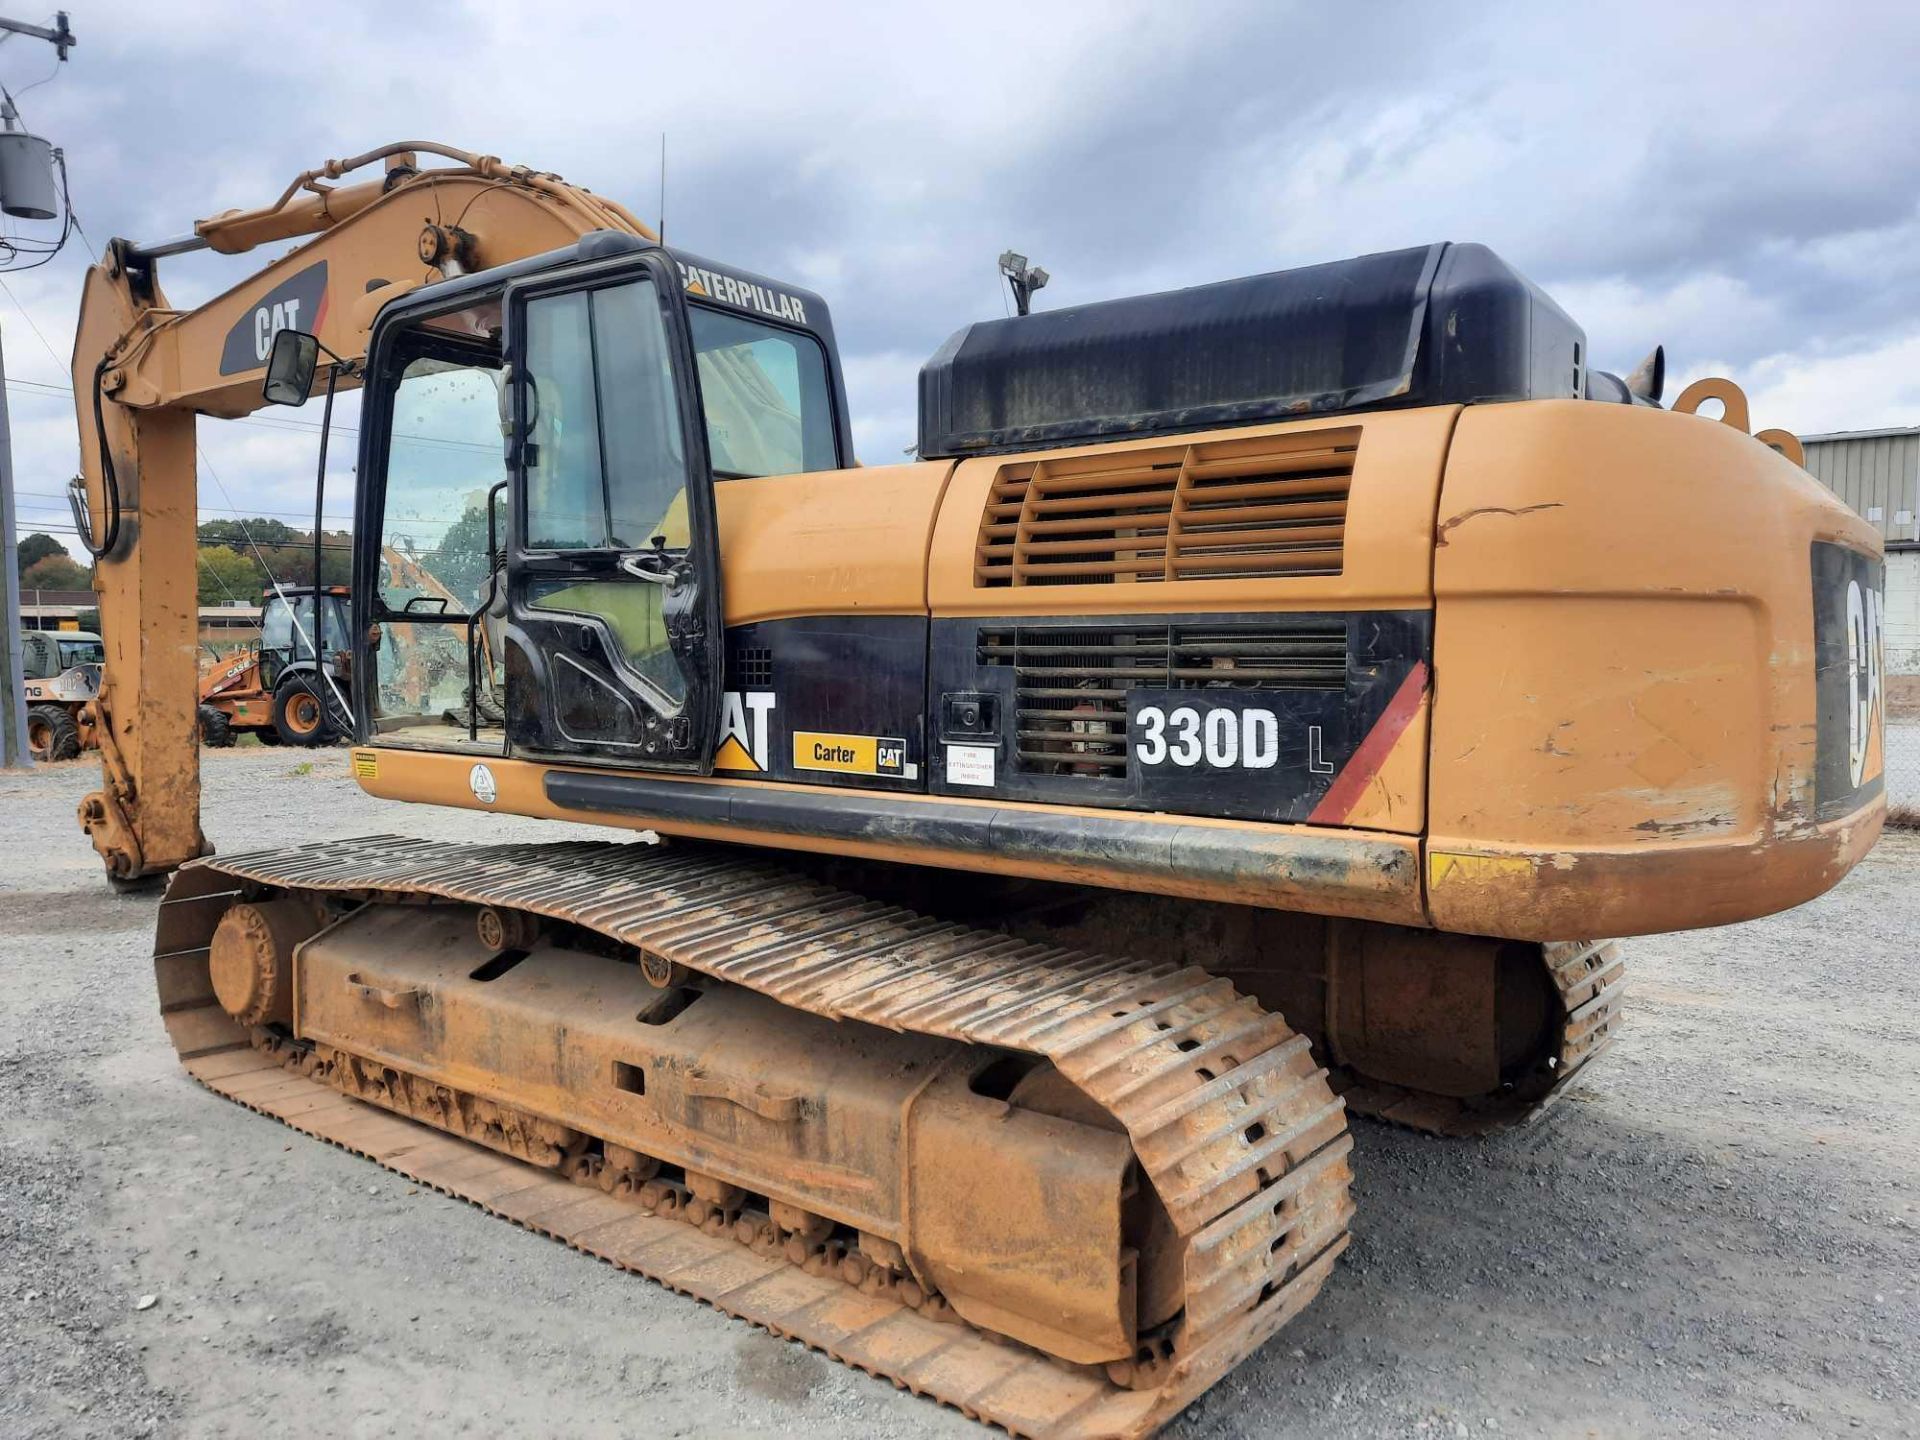 (SUBJECT TO OWNER CONFIRMATION) 2007 Caterpillar 330DL Excavator - Image 12 of 80